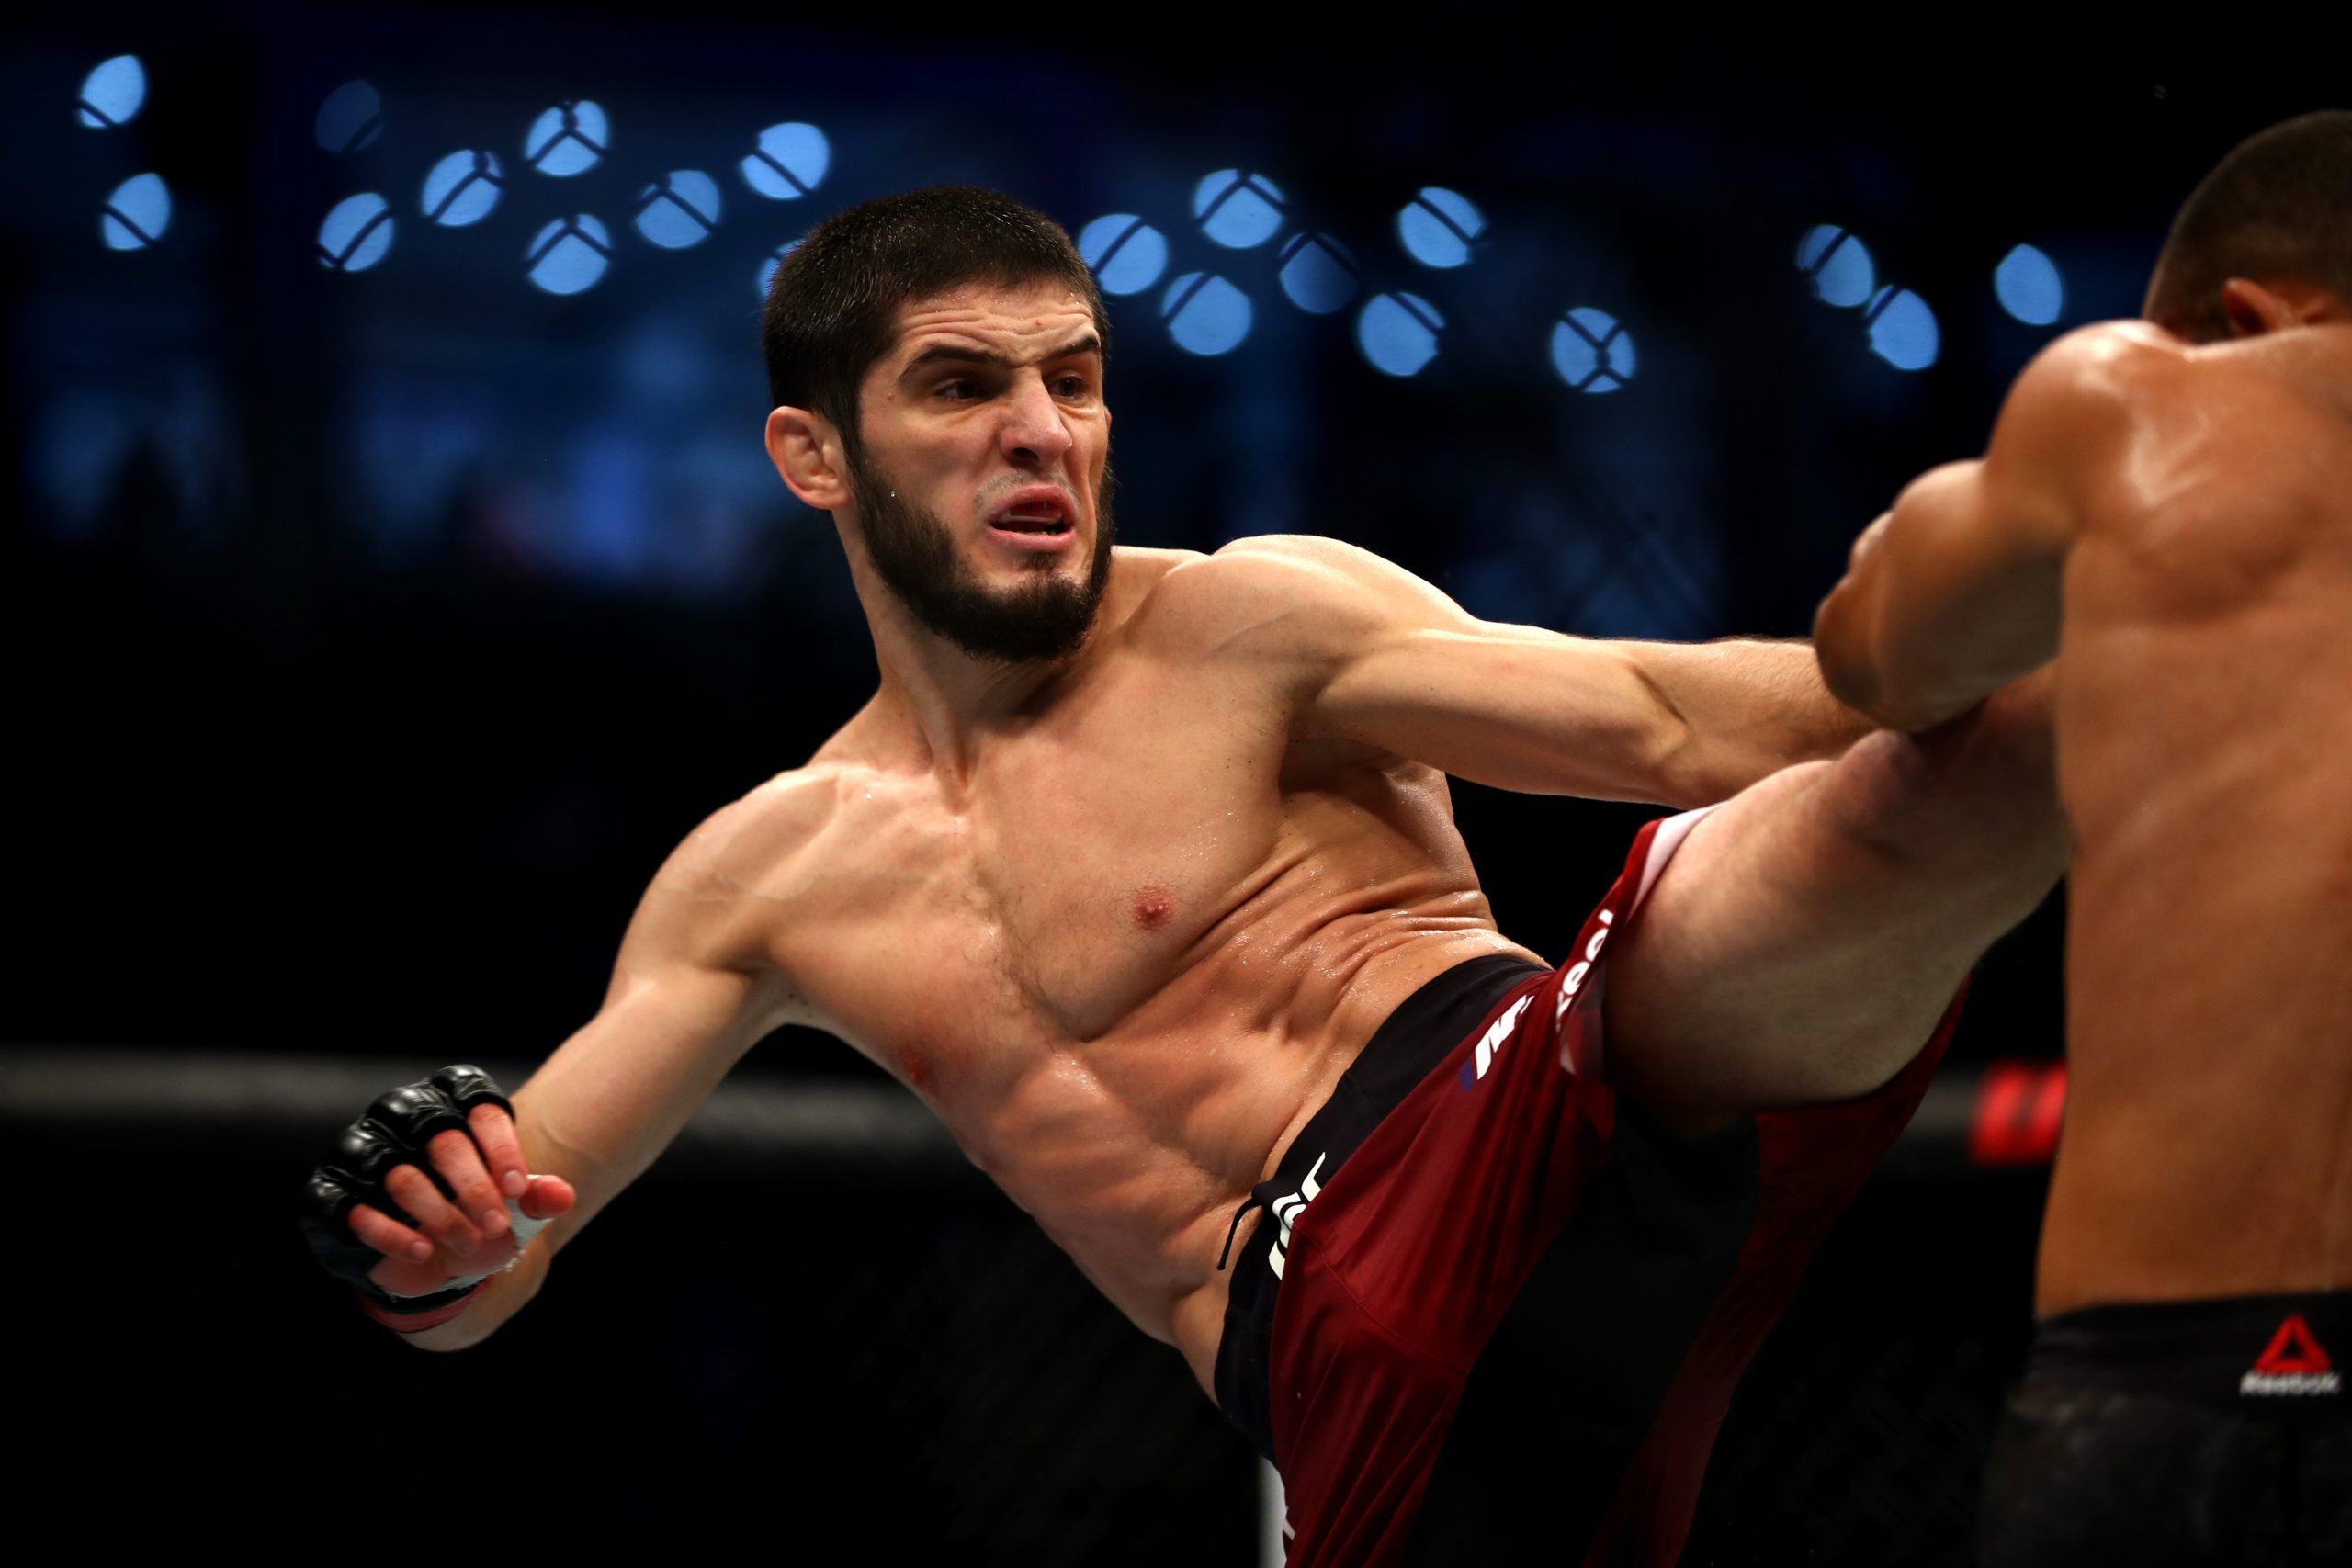 Islam Makhachev shares info on heart surgery and effects on MMA career